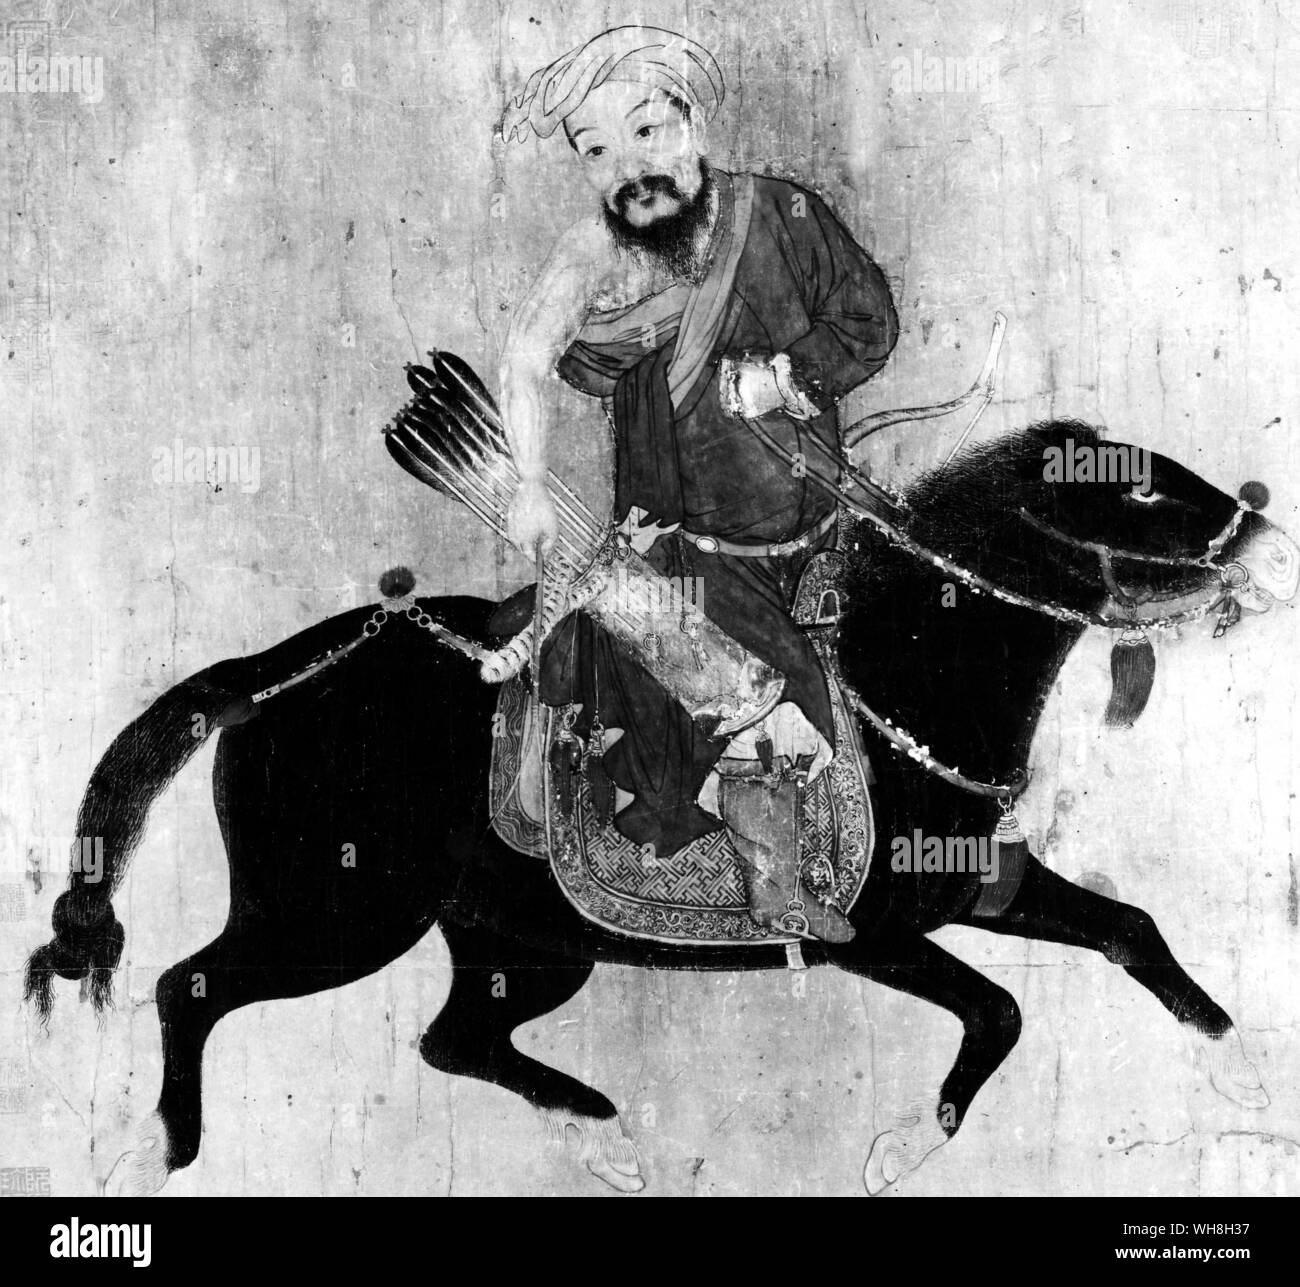 Chinese drawing of a Mongolian mounted archer, 15th-16th century. From Encyclopedia of the Horse page 225. Stock Photo